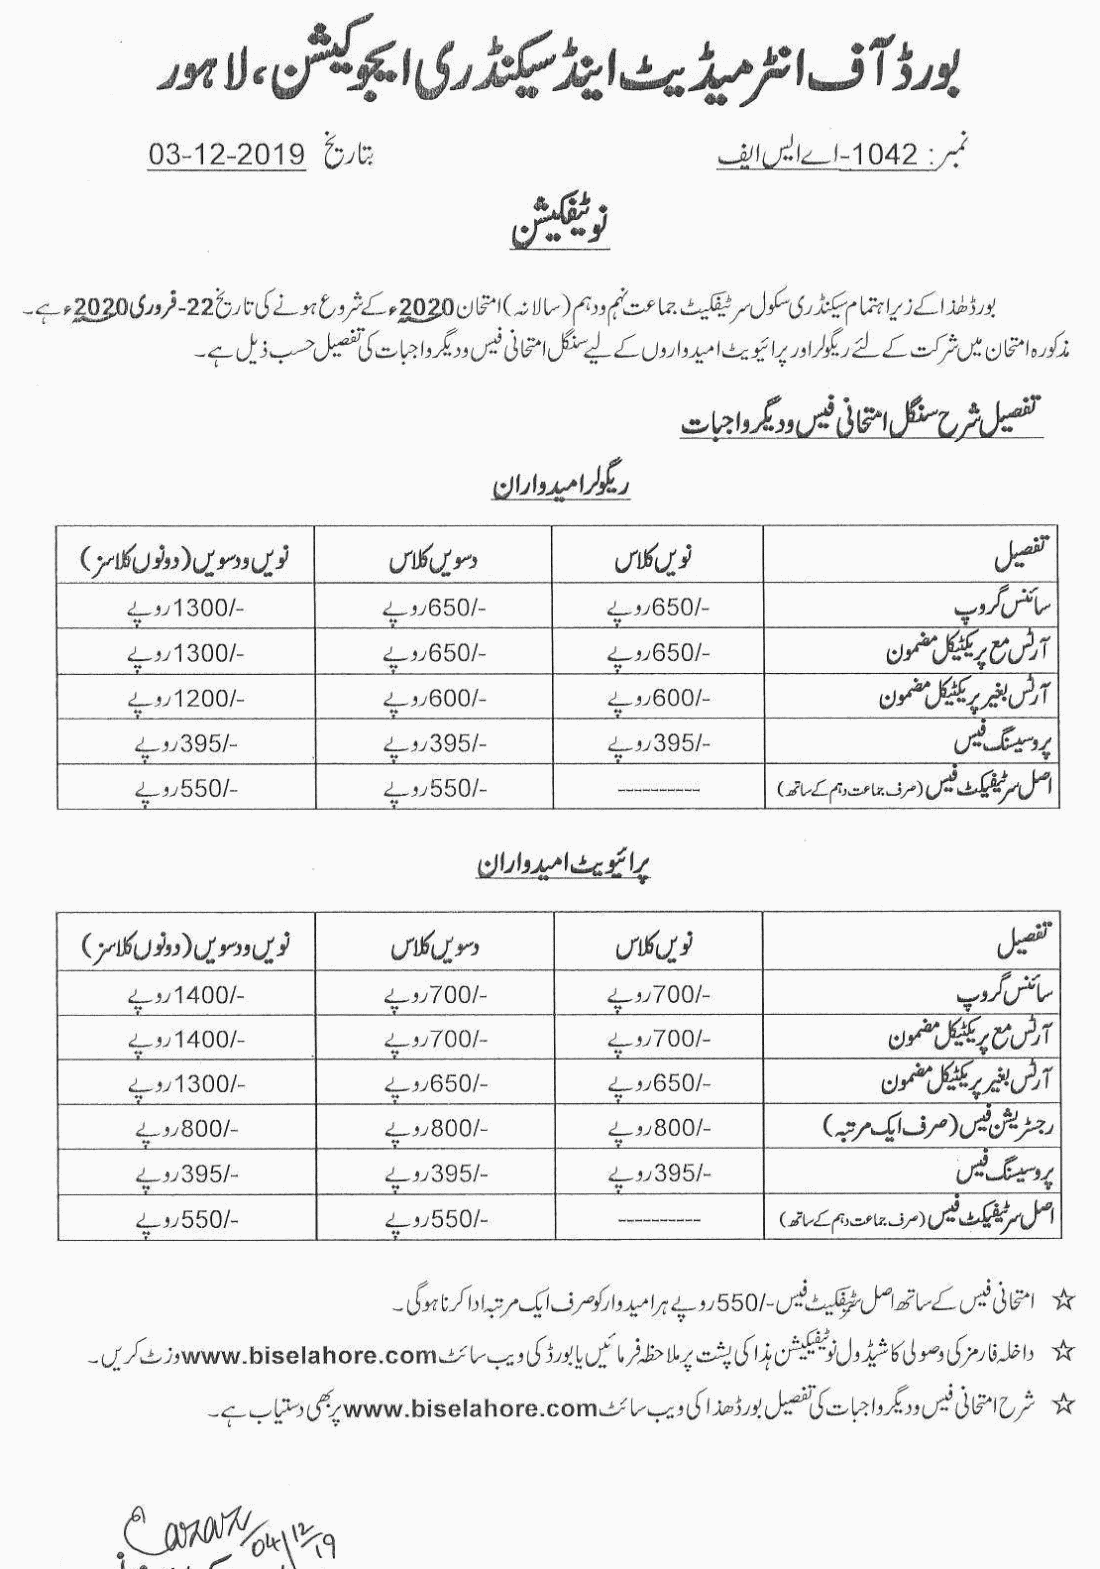 lahore-board-ssc-exam-schedule-2020-page2